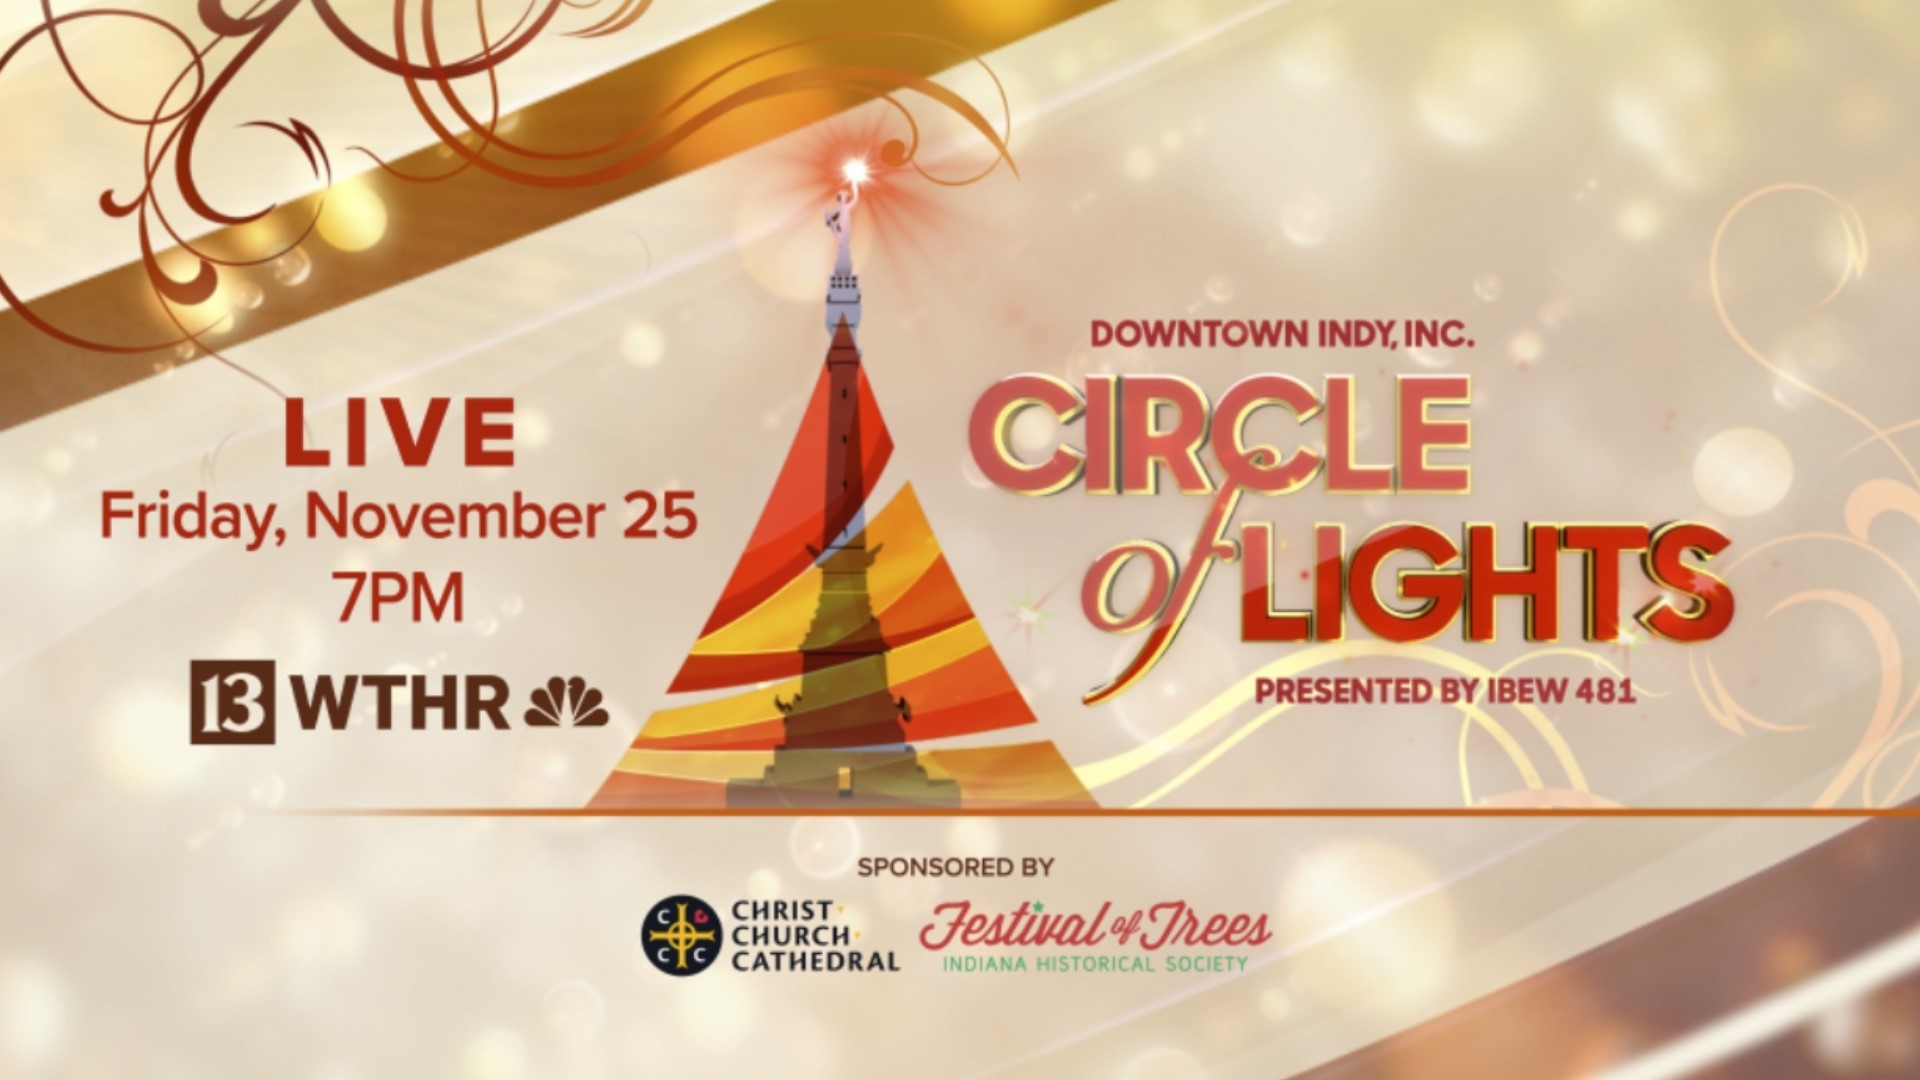 WTHR-TV and Downtown Indy, Inc. will flip the switch on the 60th Anniversary of Circle of Lights presented by IBEW 481 on Nov. 25.